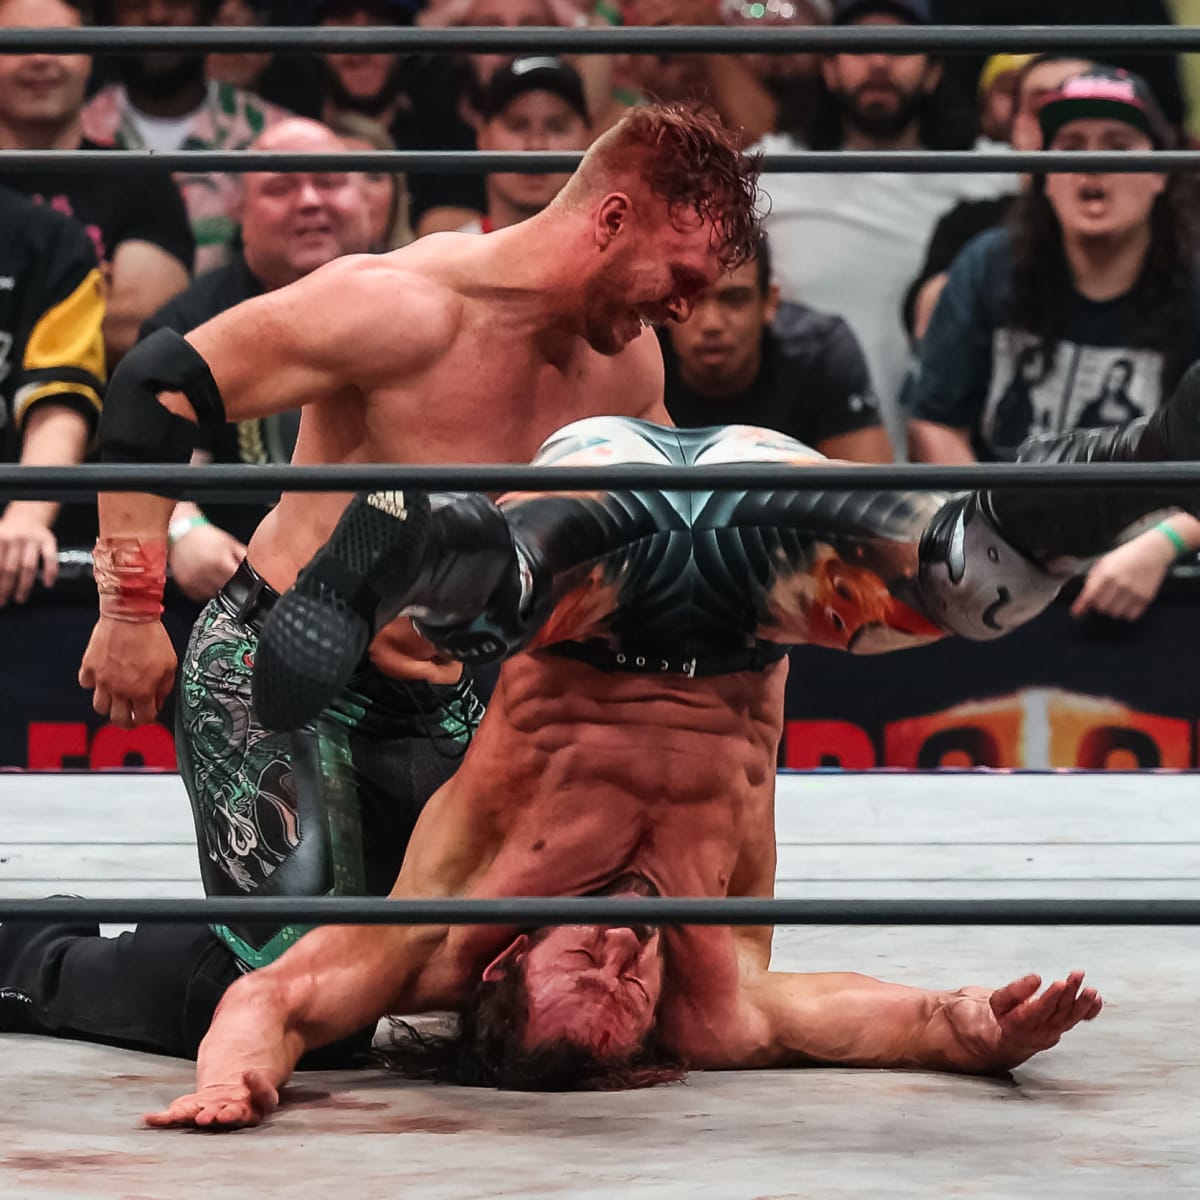 Kenny Omega responds to criticism of Will Ospreay match - Sports